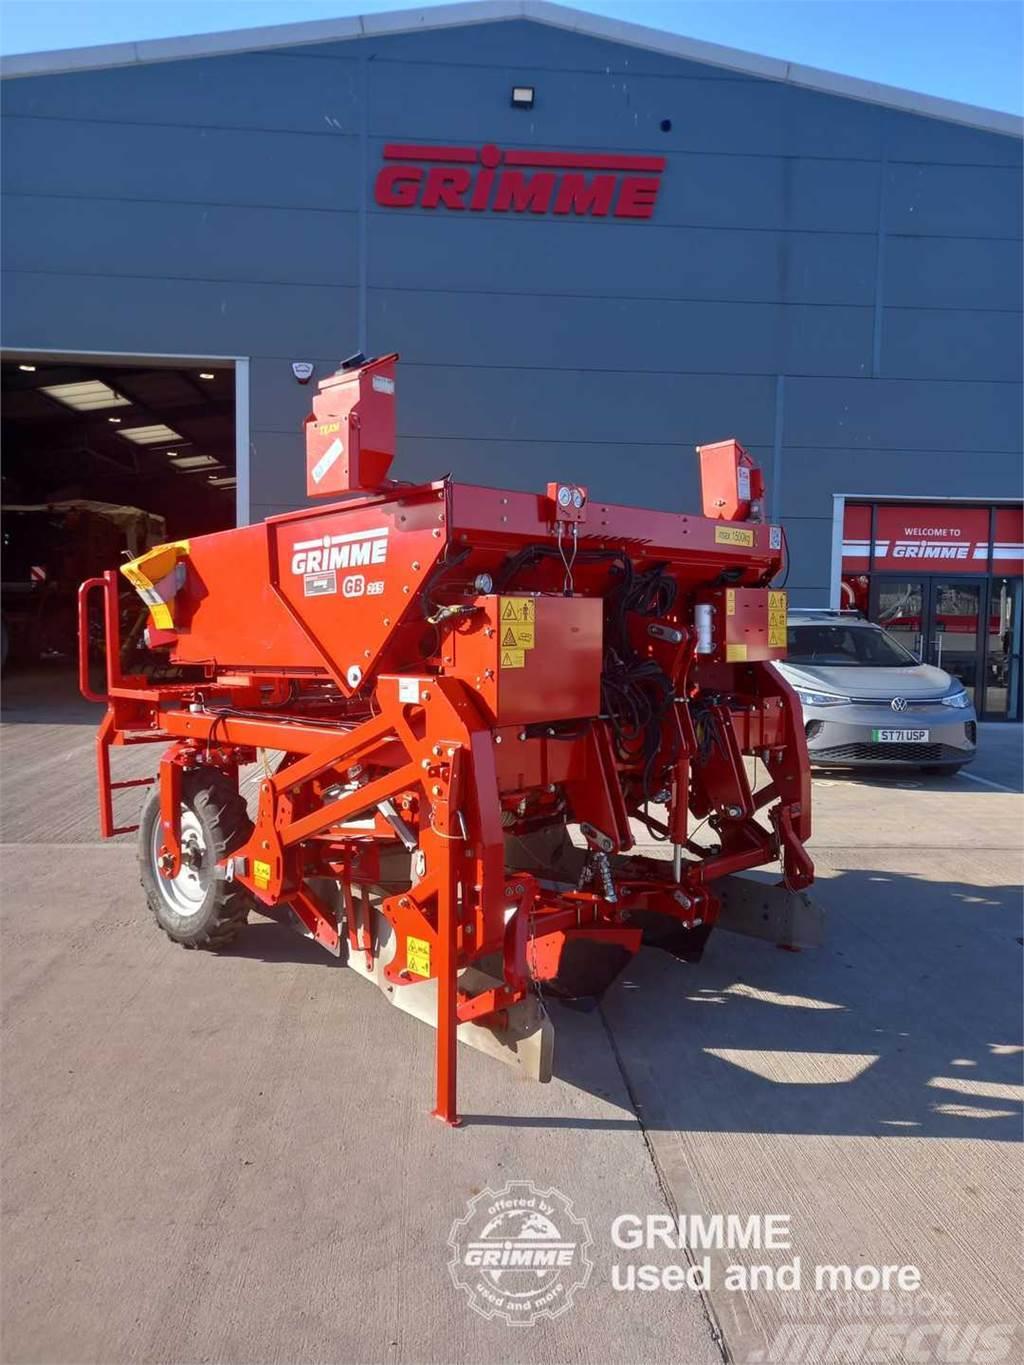 Grimme GB 215 Potato harvesters and diggers